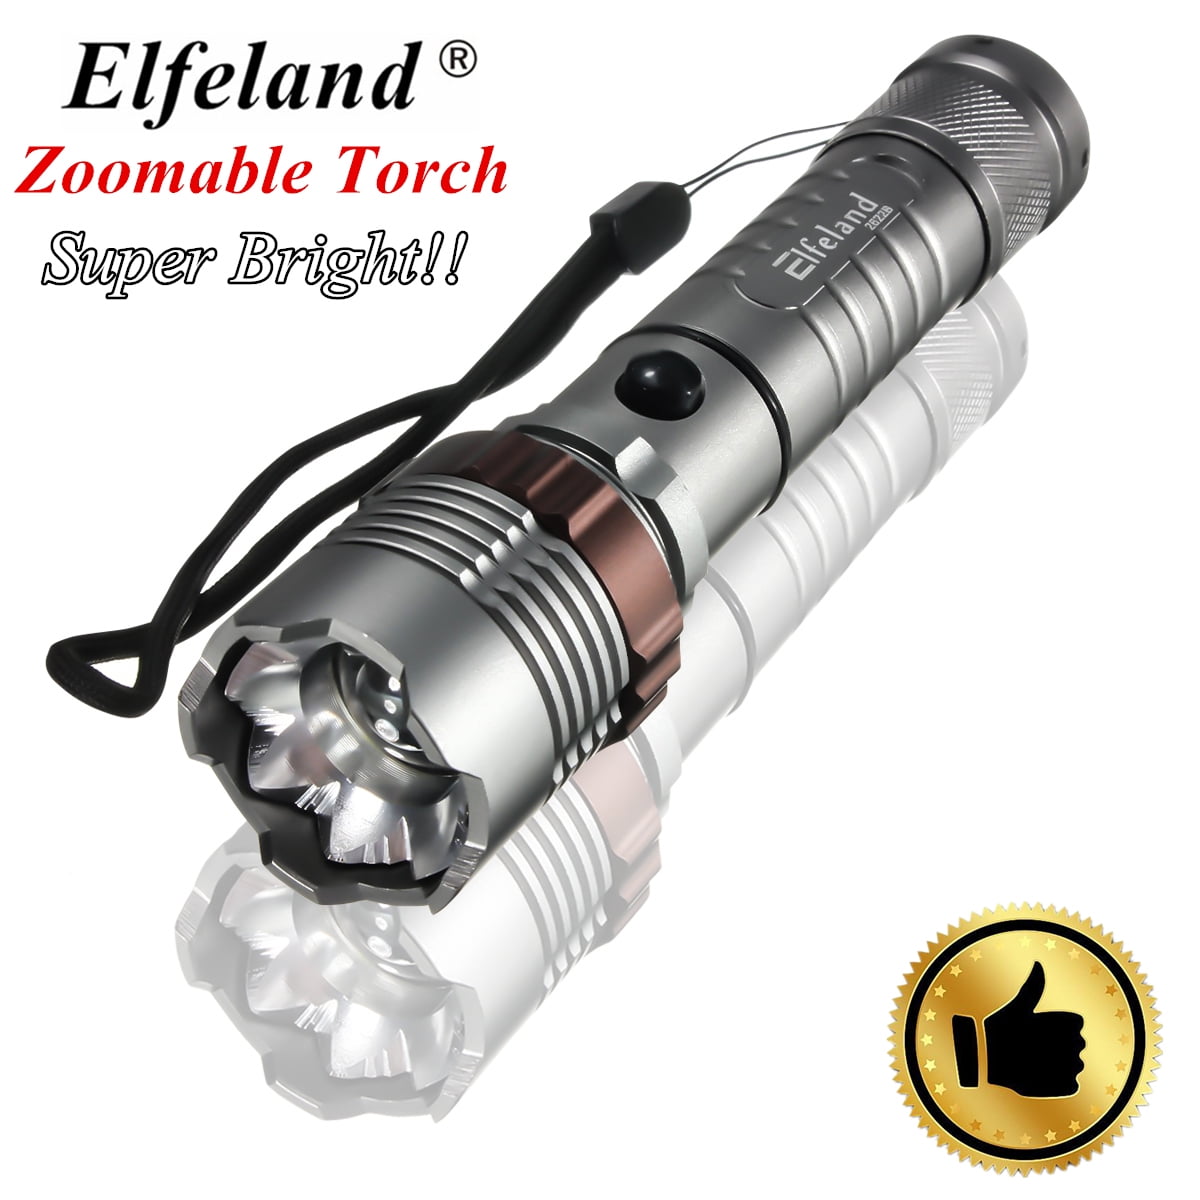 Skywolfeye Flashlight Zoomable Focus 20000lm Tactical T6 LED 18650 Lamp Torch 